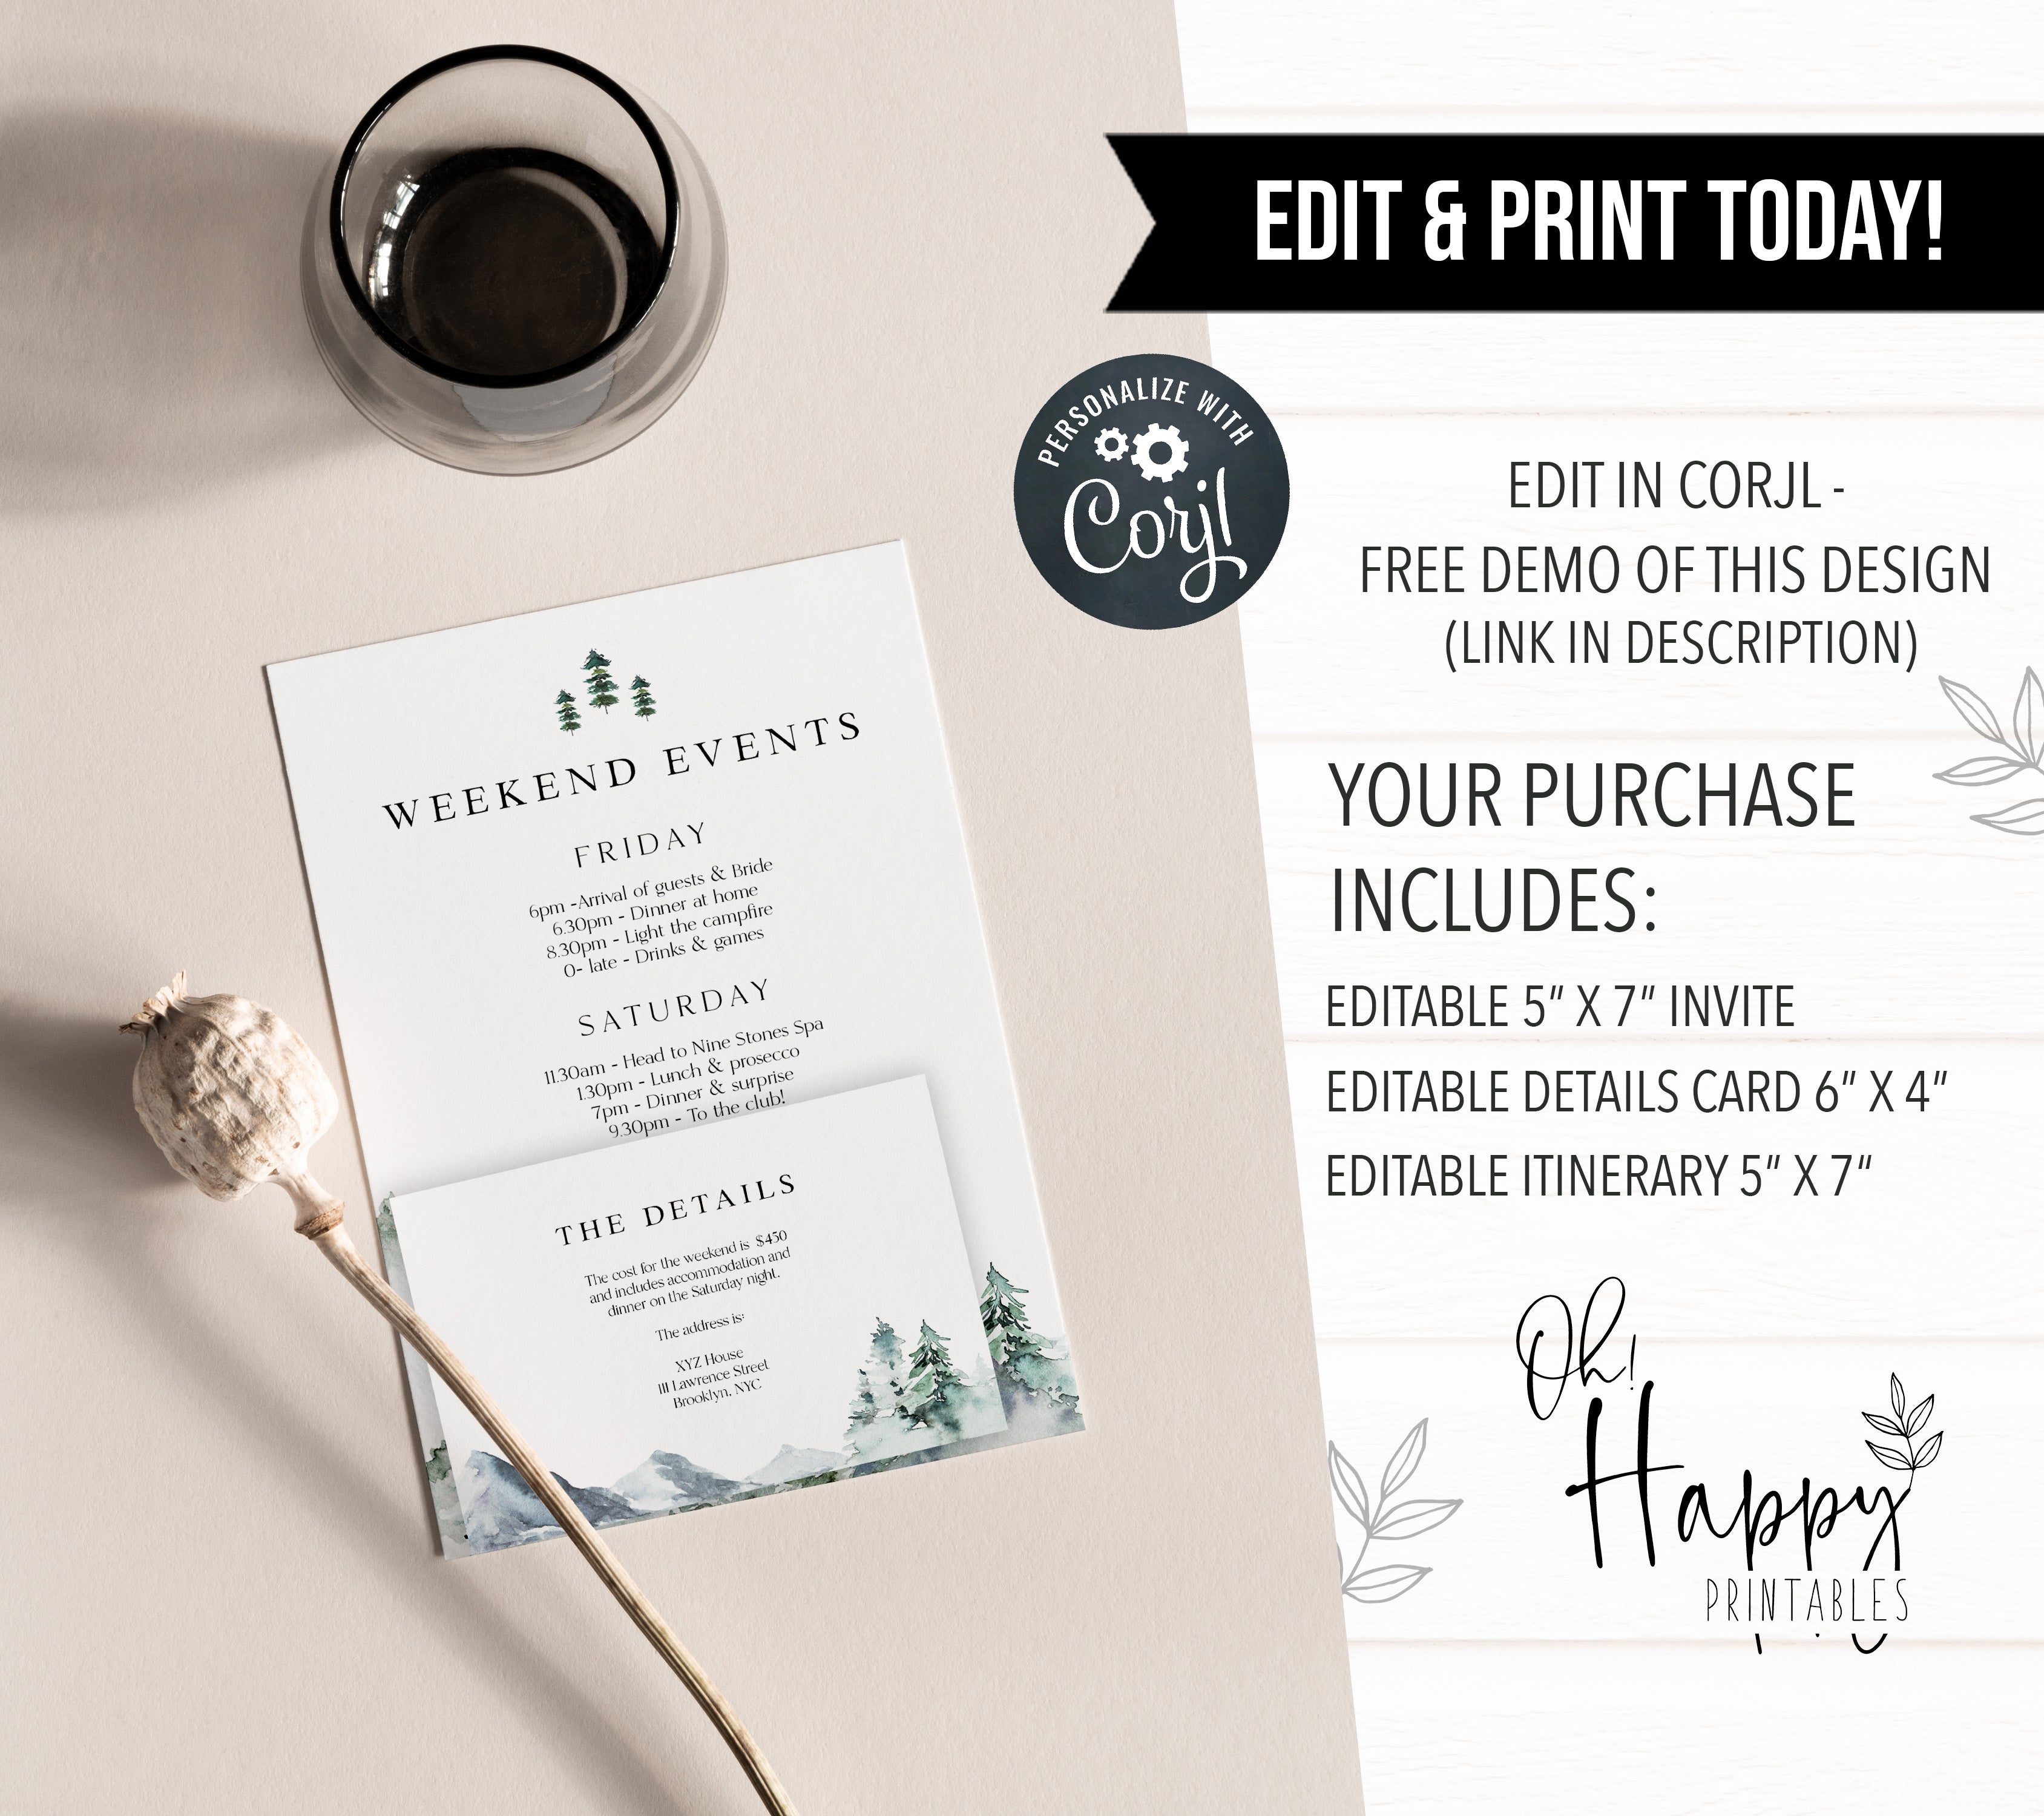 Fully editable and printable mountains & mimosa invitation with a mountain design. Perfect for a snowy cabin mountain bridal shower